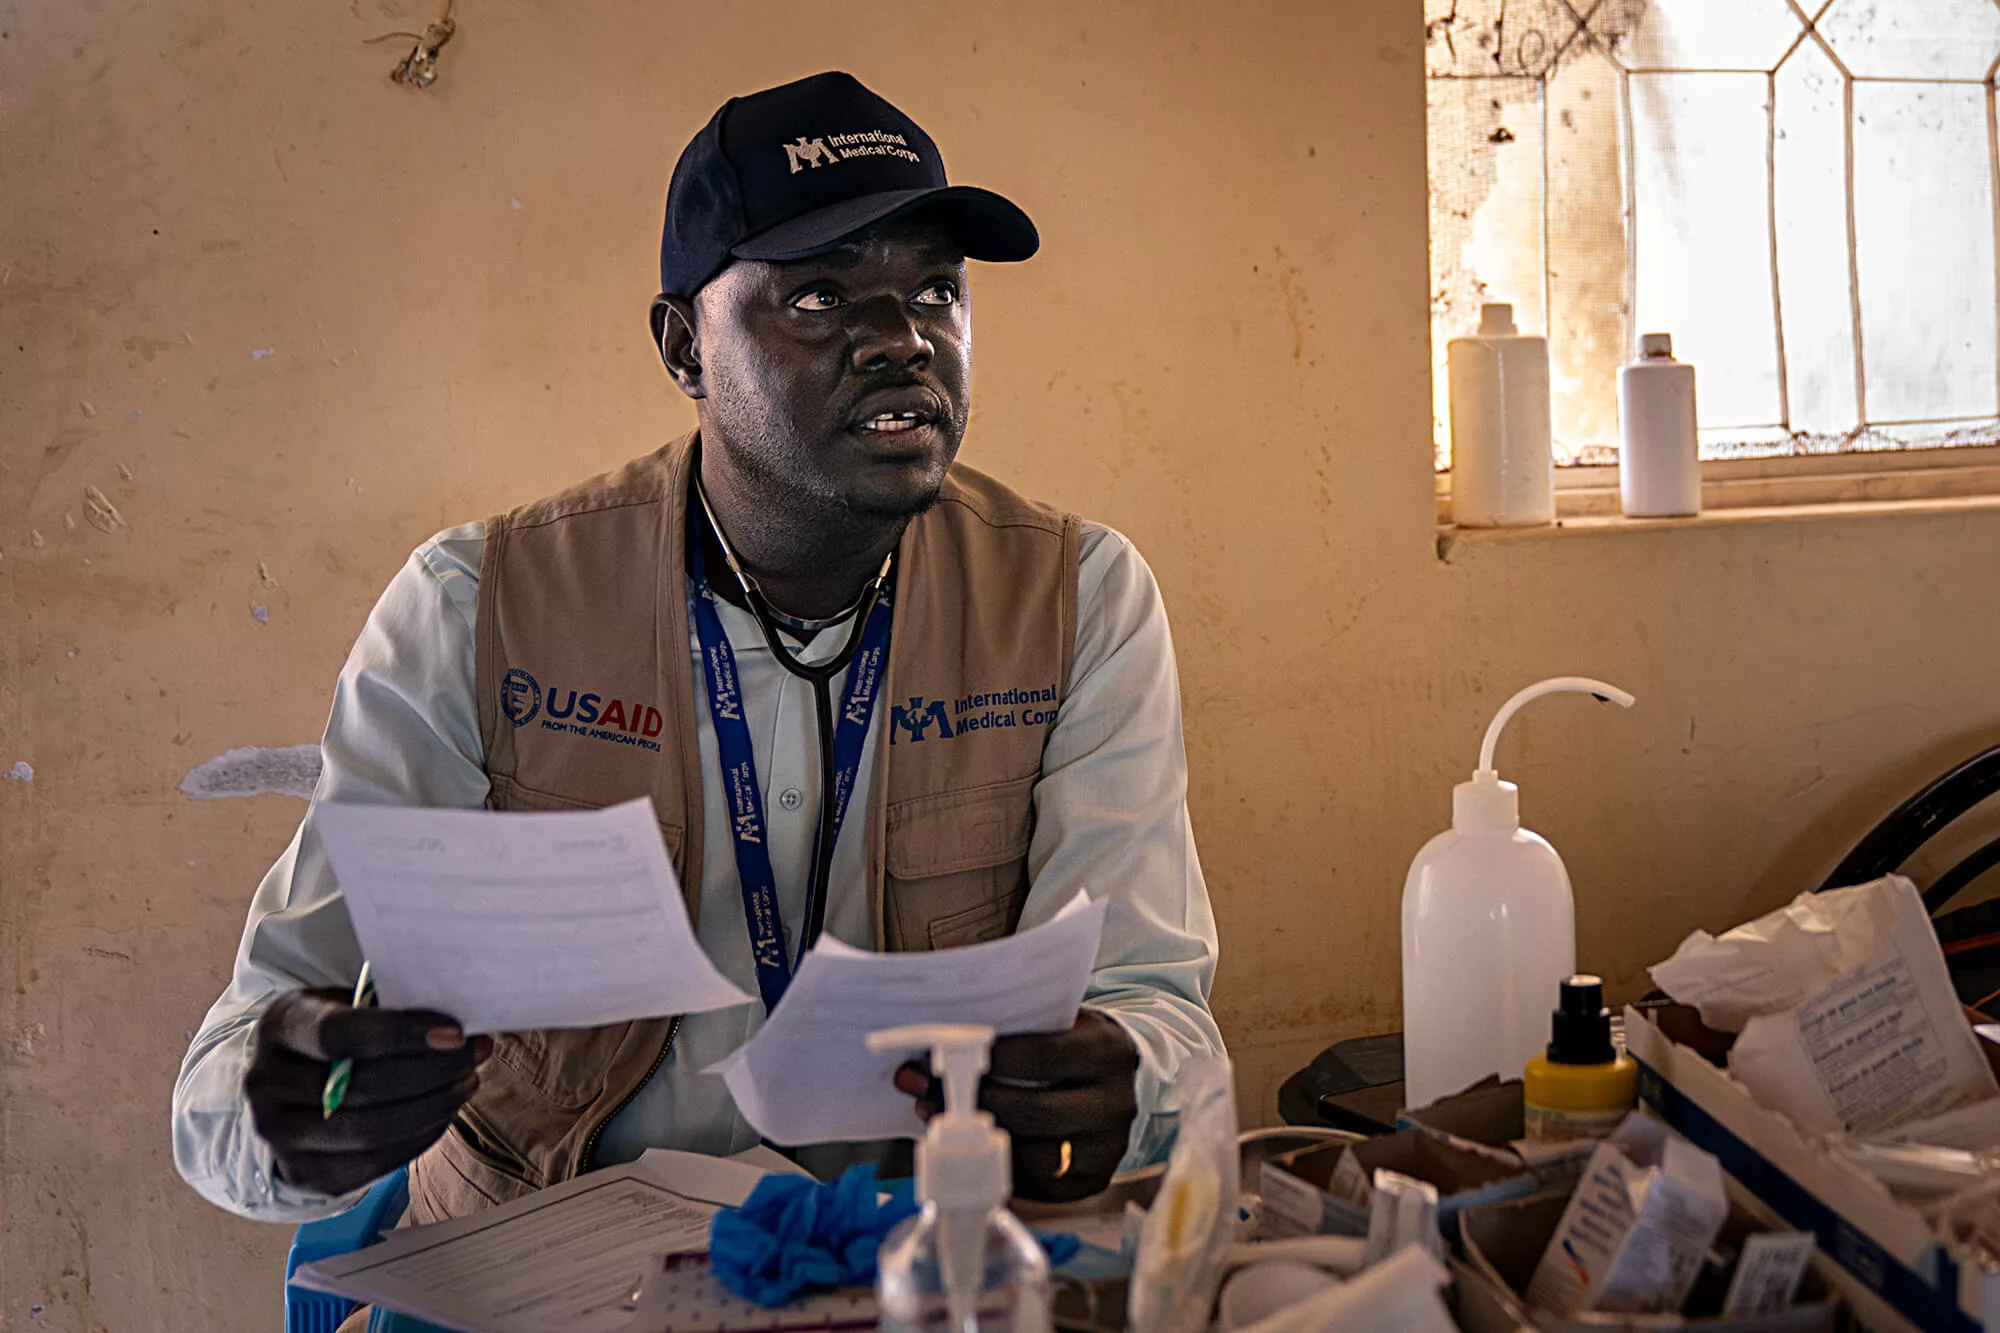 Dr. William Marcello Nazario leads our emergency response team in Renk, South Sudan.